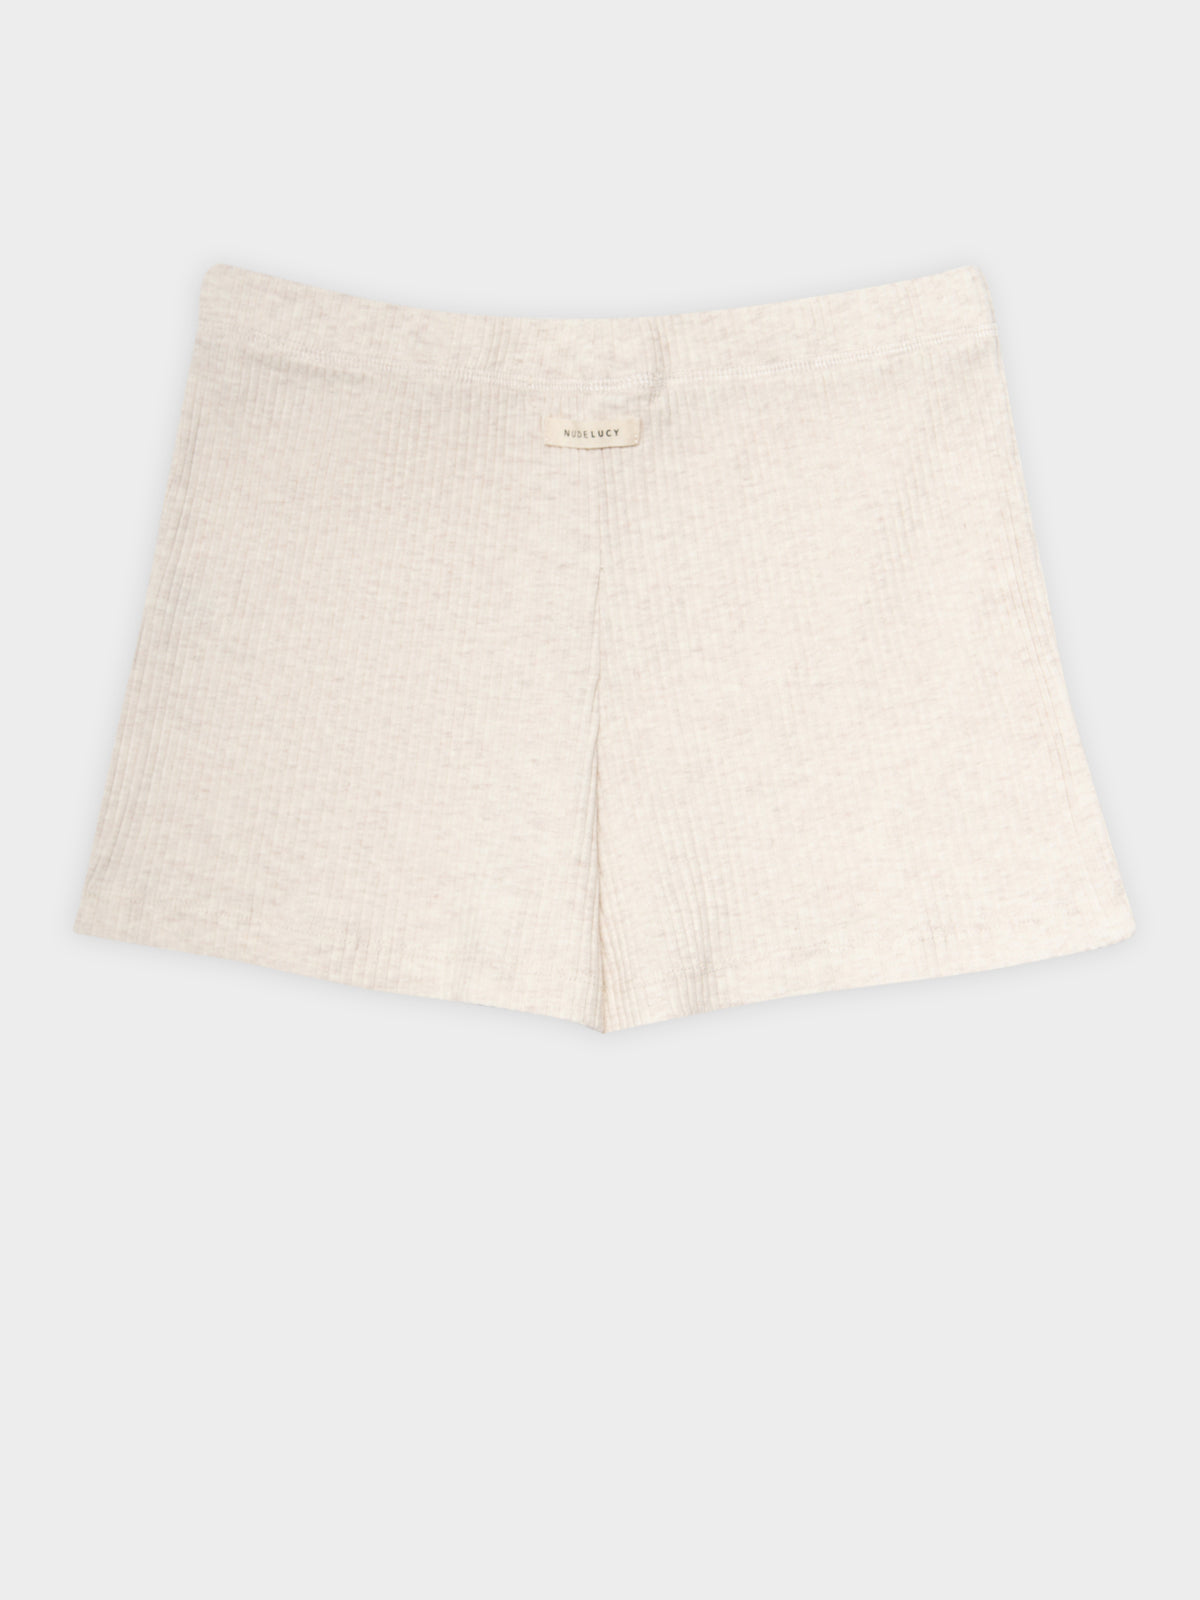 Ribbed Lounge Shorts in Cream Marle